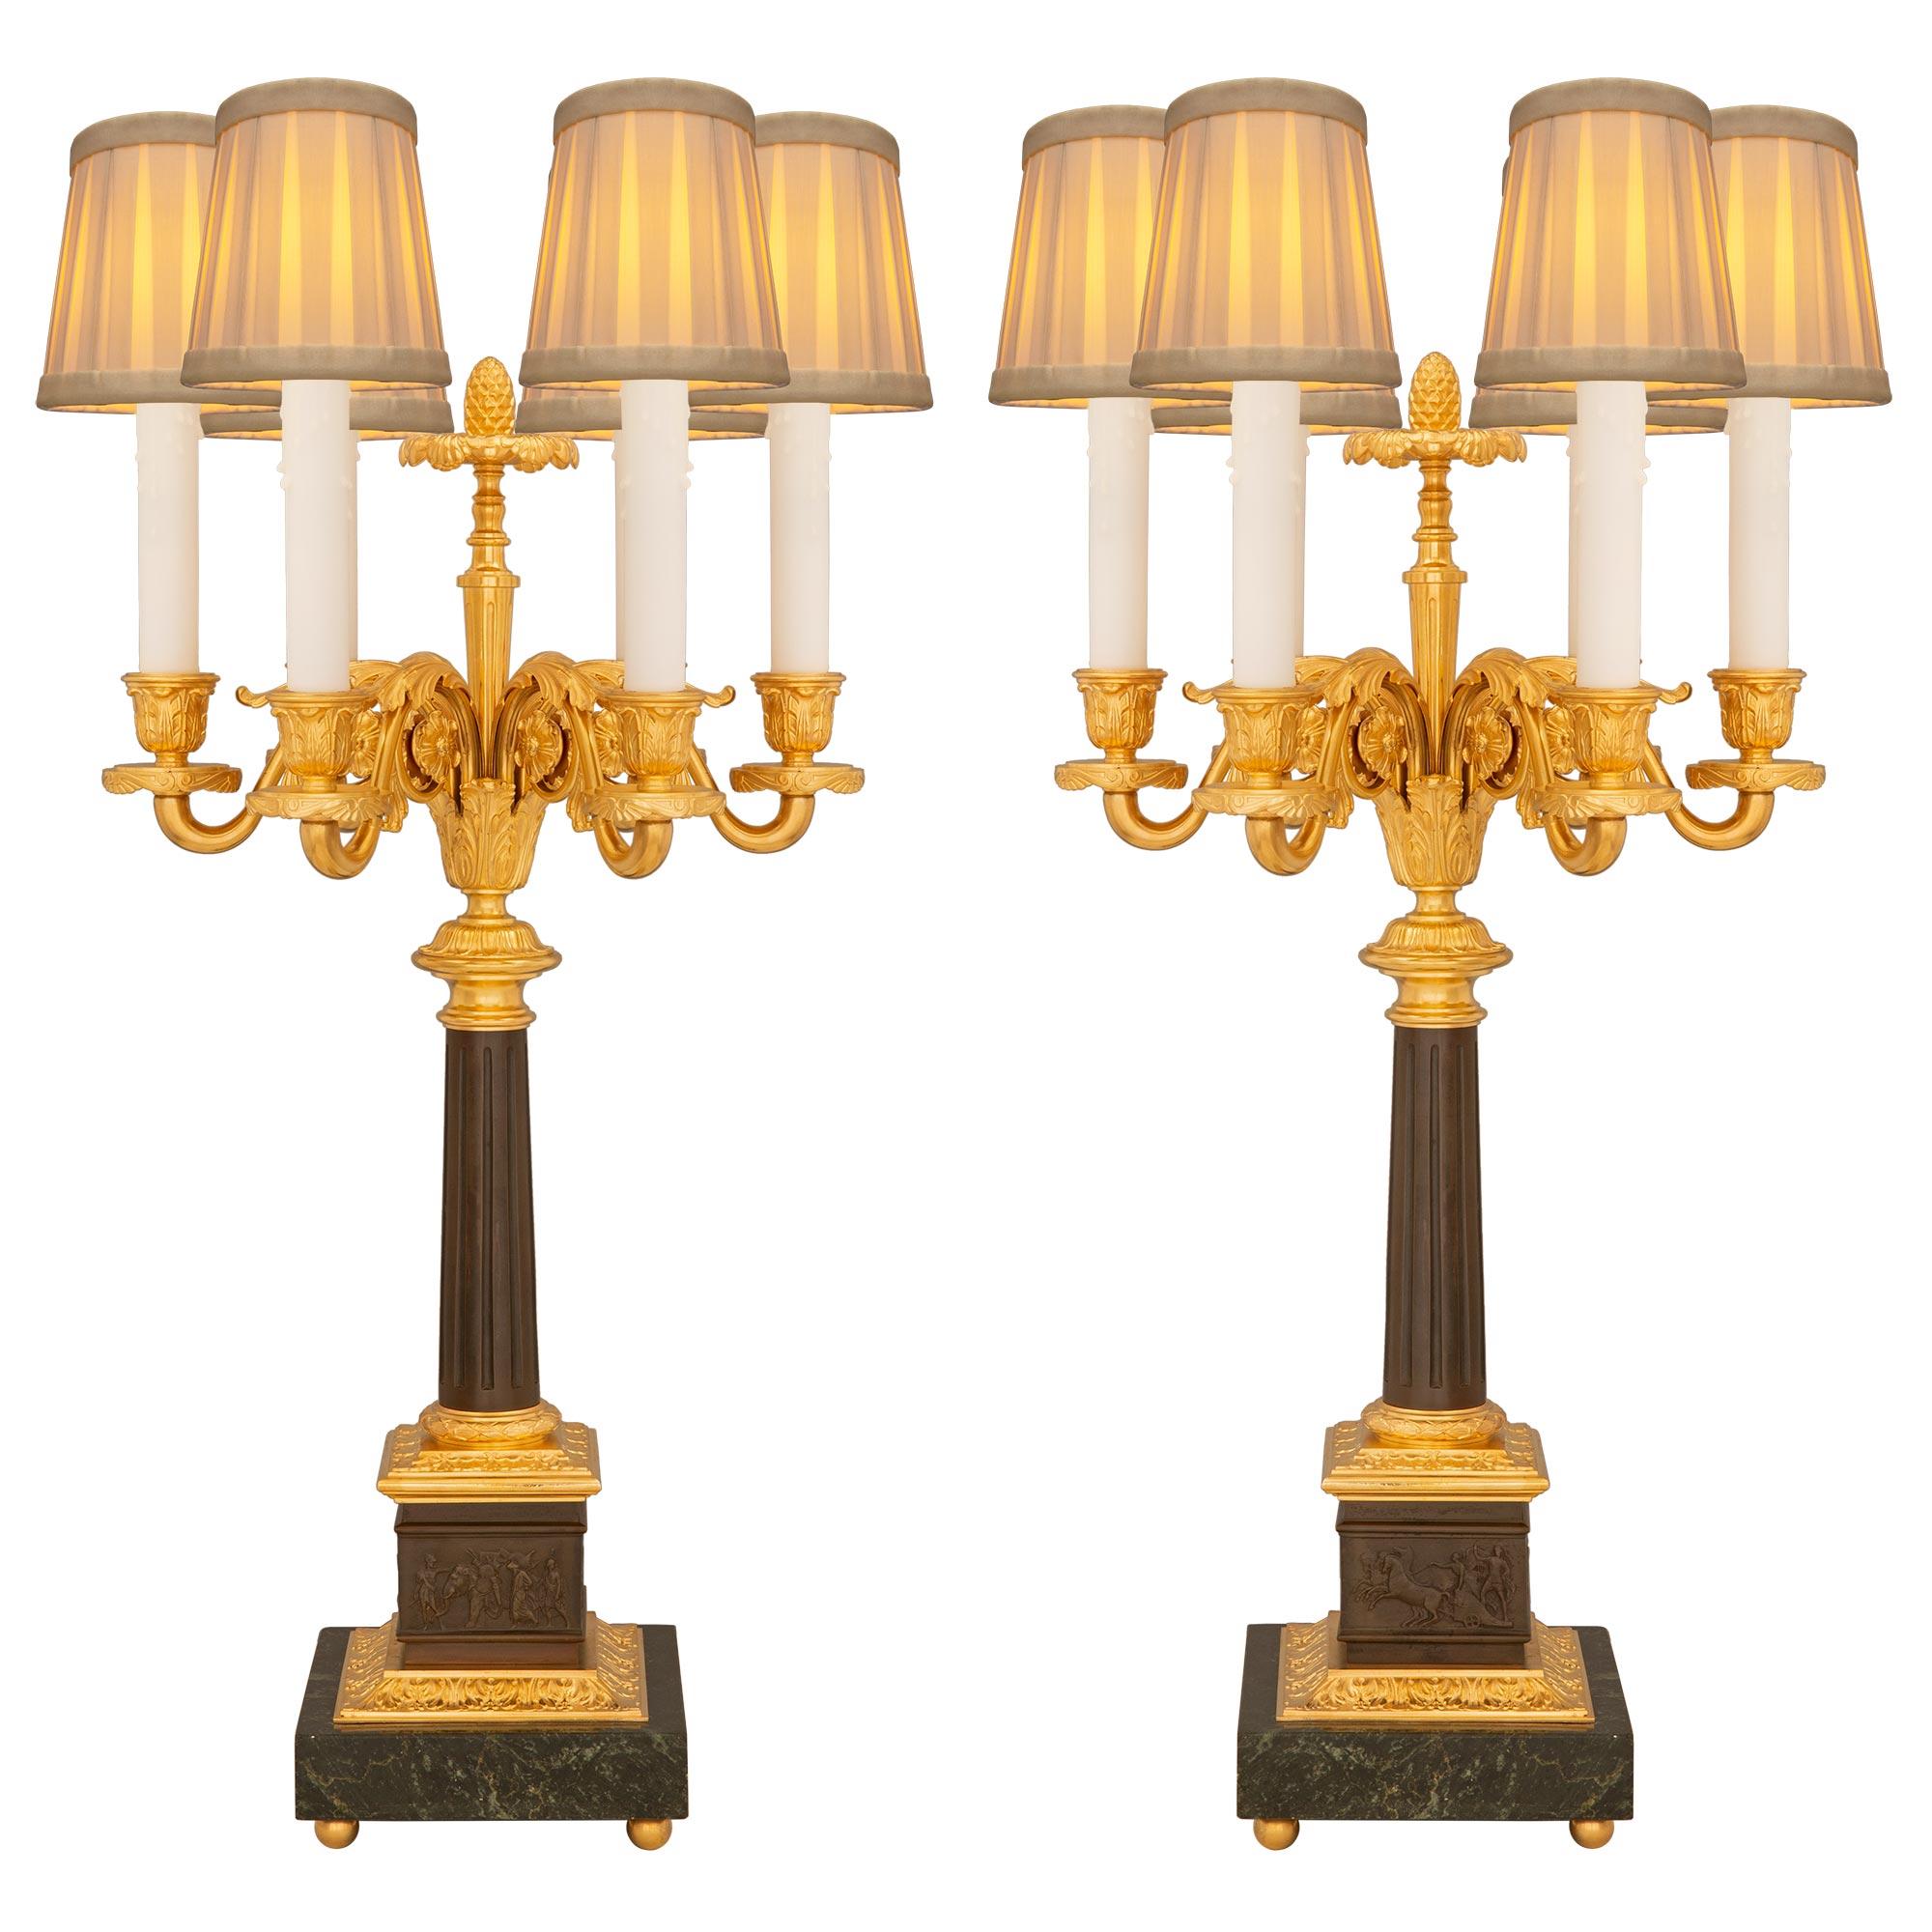 An impressive pair of French 19th century Louis XVI st. patinated bronze, ormolu, and Vert de Patricia marble candelabra lamps. Each six arm lamp is raised by a square Vert de Patricia marble base with fine ormolu ball feet and a richly chased wrap